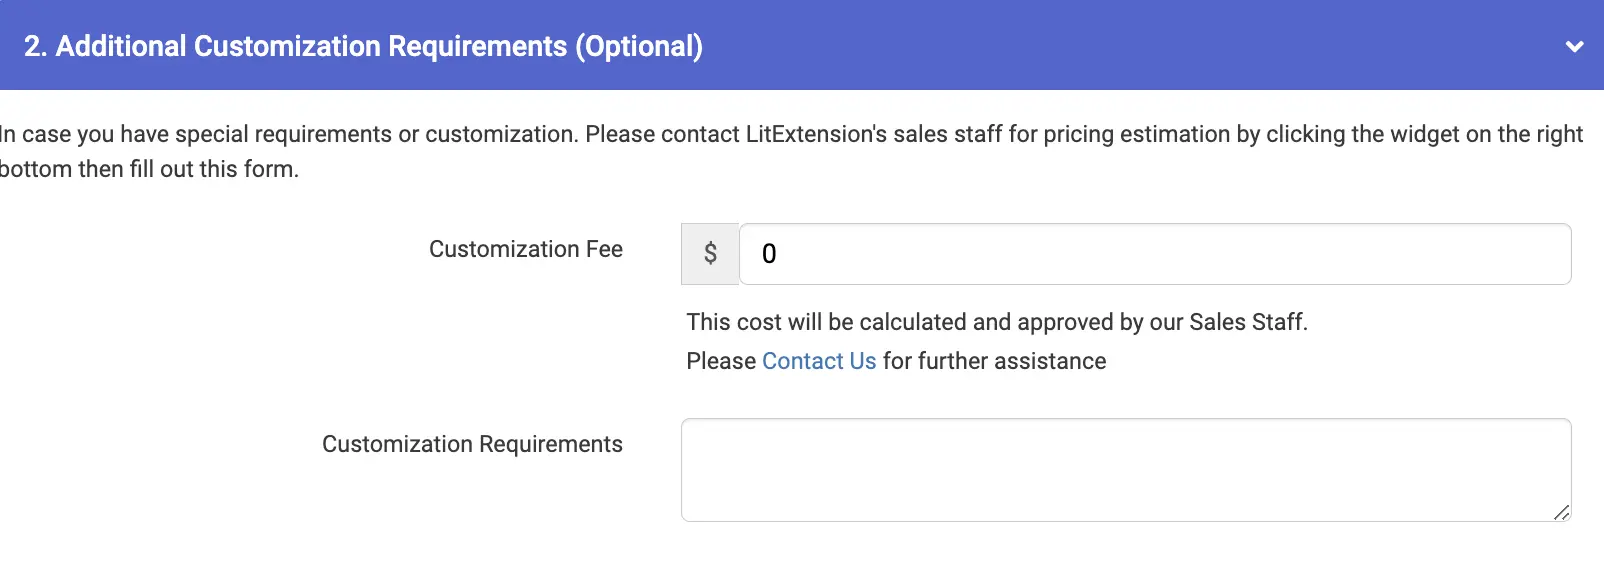 litextension’s migration additional customization requirements